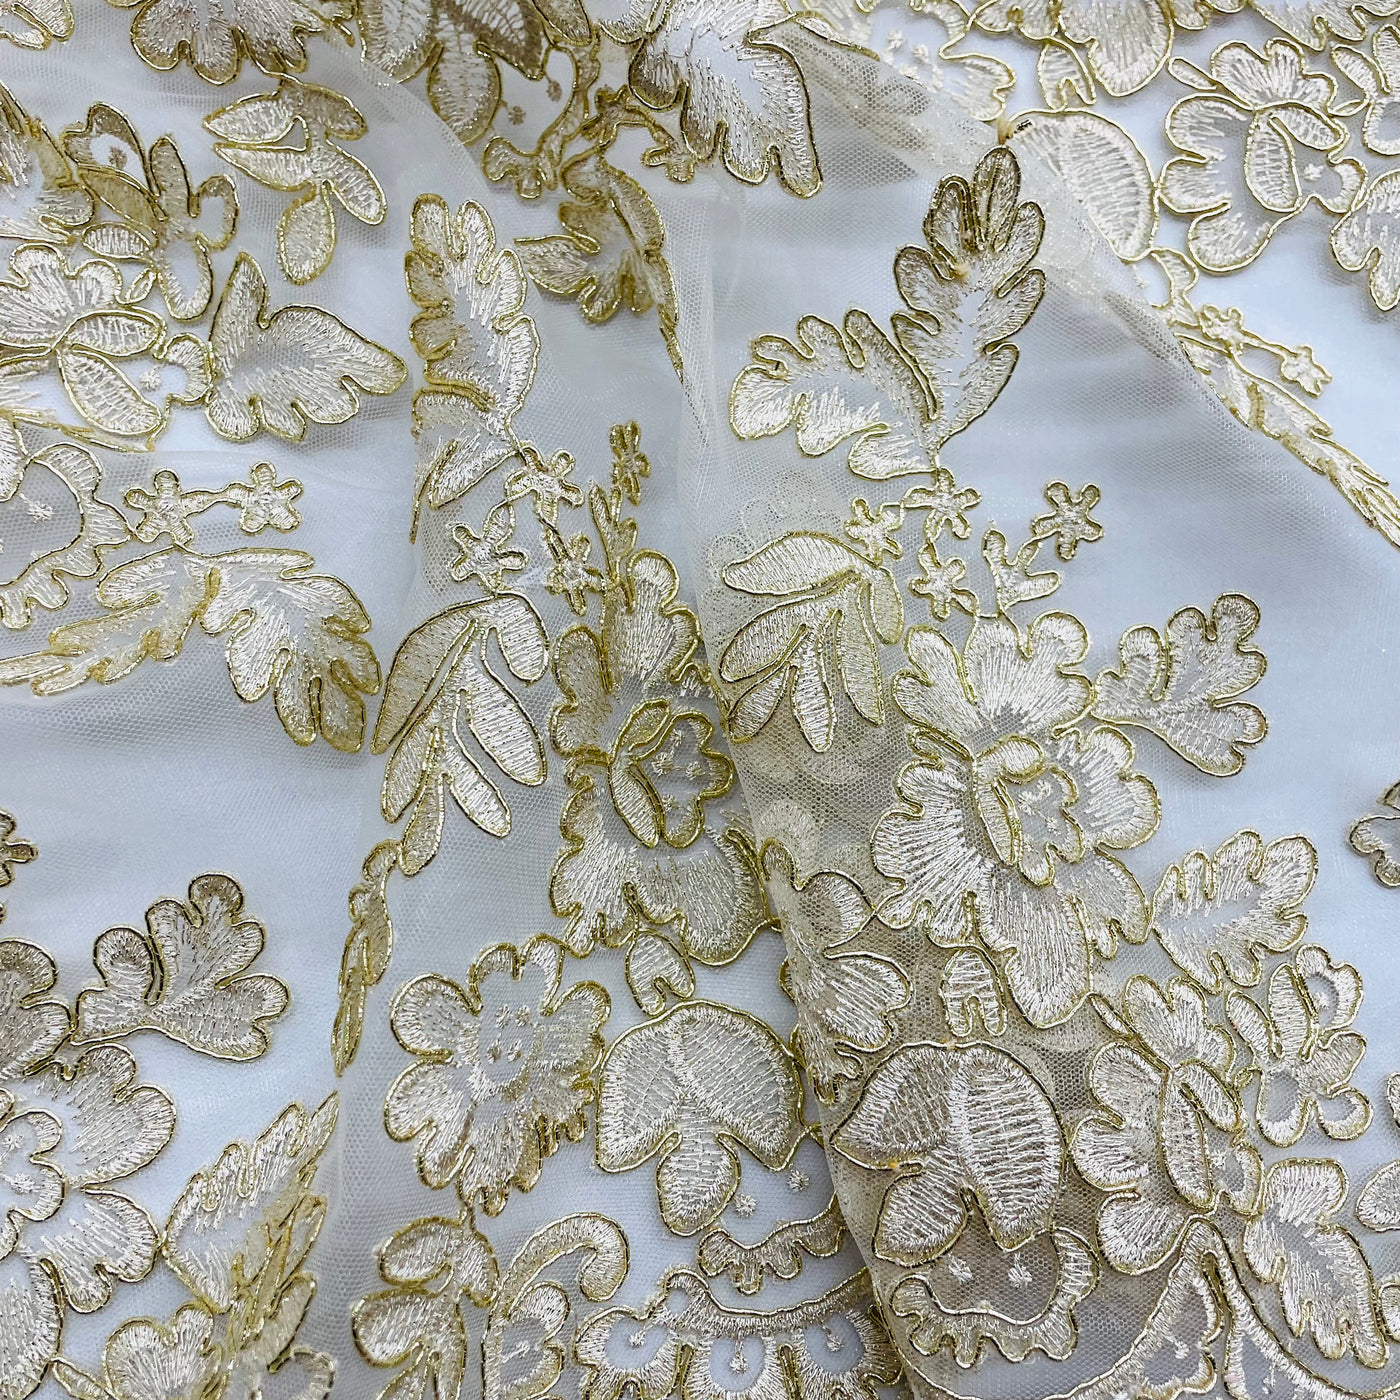 Corded Bridal Lace Fabric Embroidered on 100% Polyester Net Mesh | Lace USA - 95409W